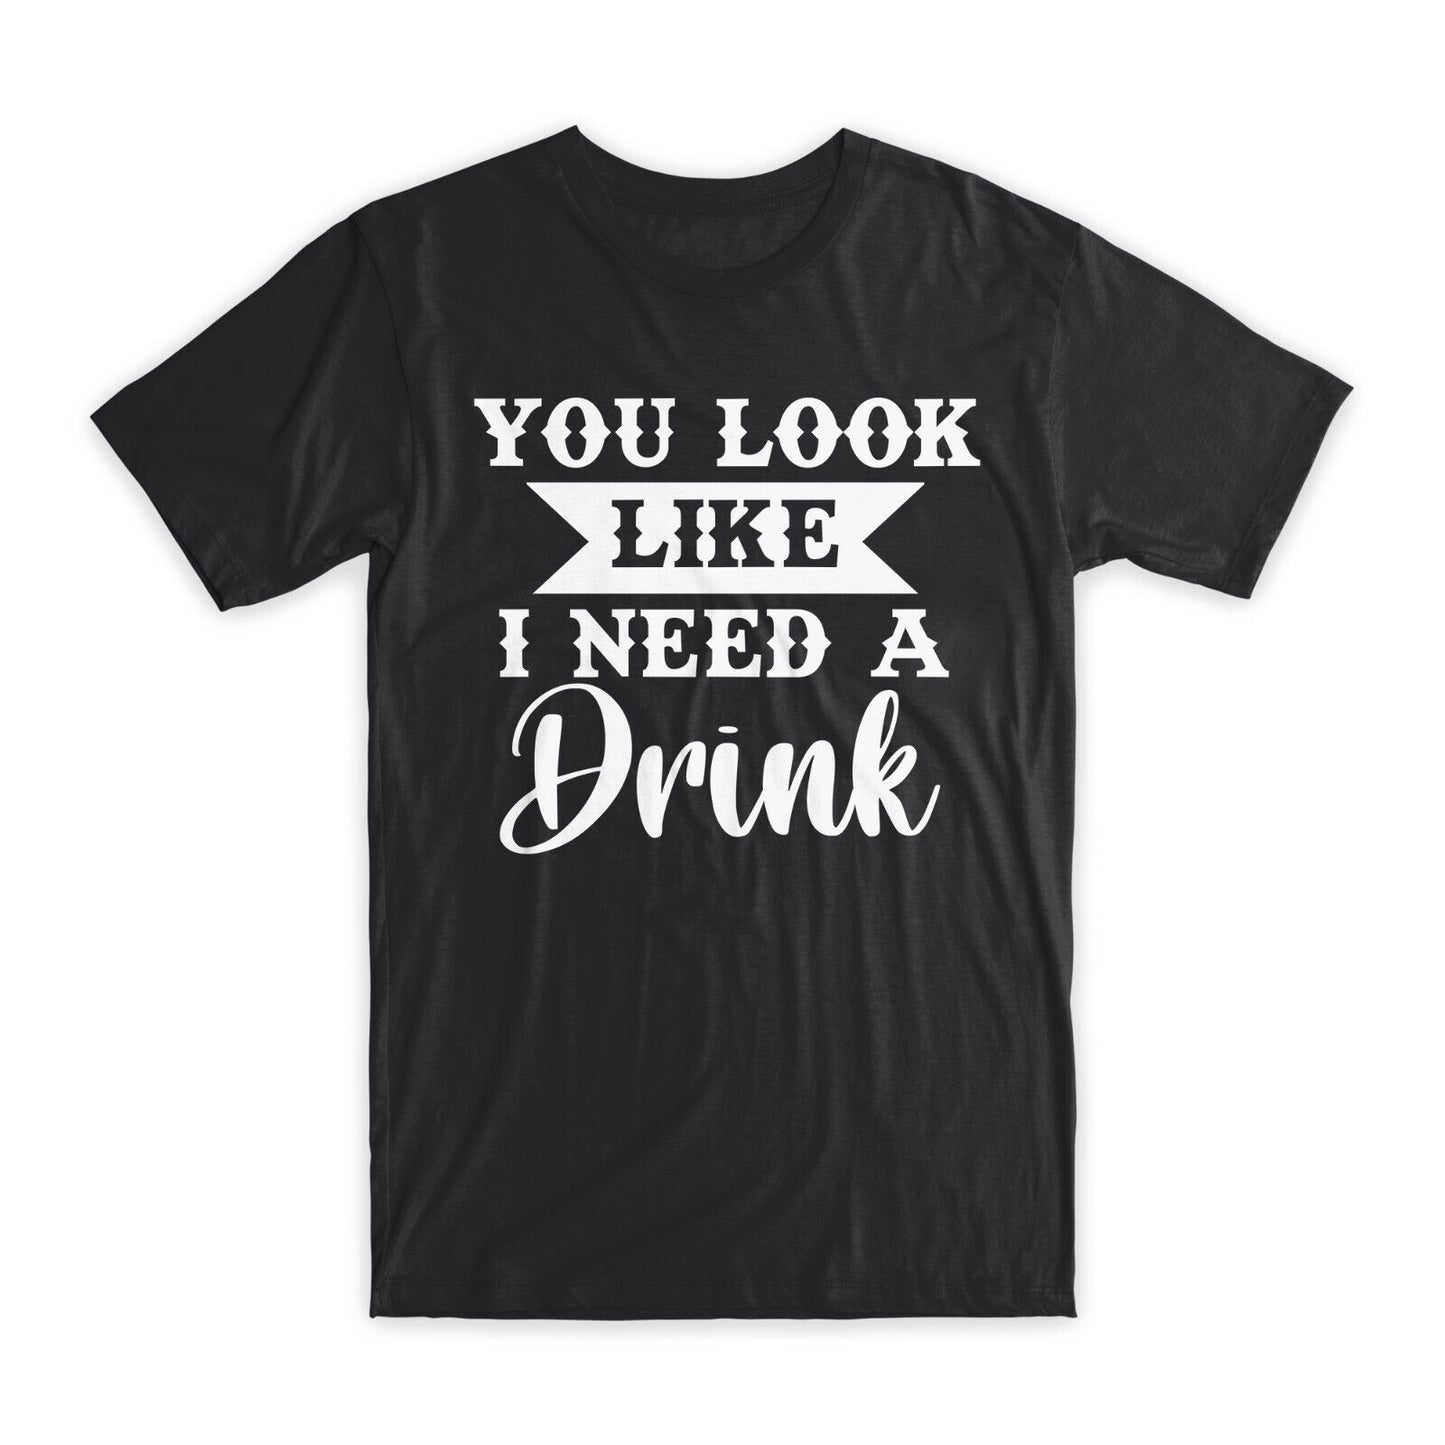 You Look Like I Need A Drink T-Shirt Premium Cotton Crew Neck Funny Tee Gift NEW